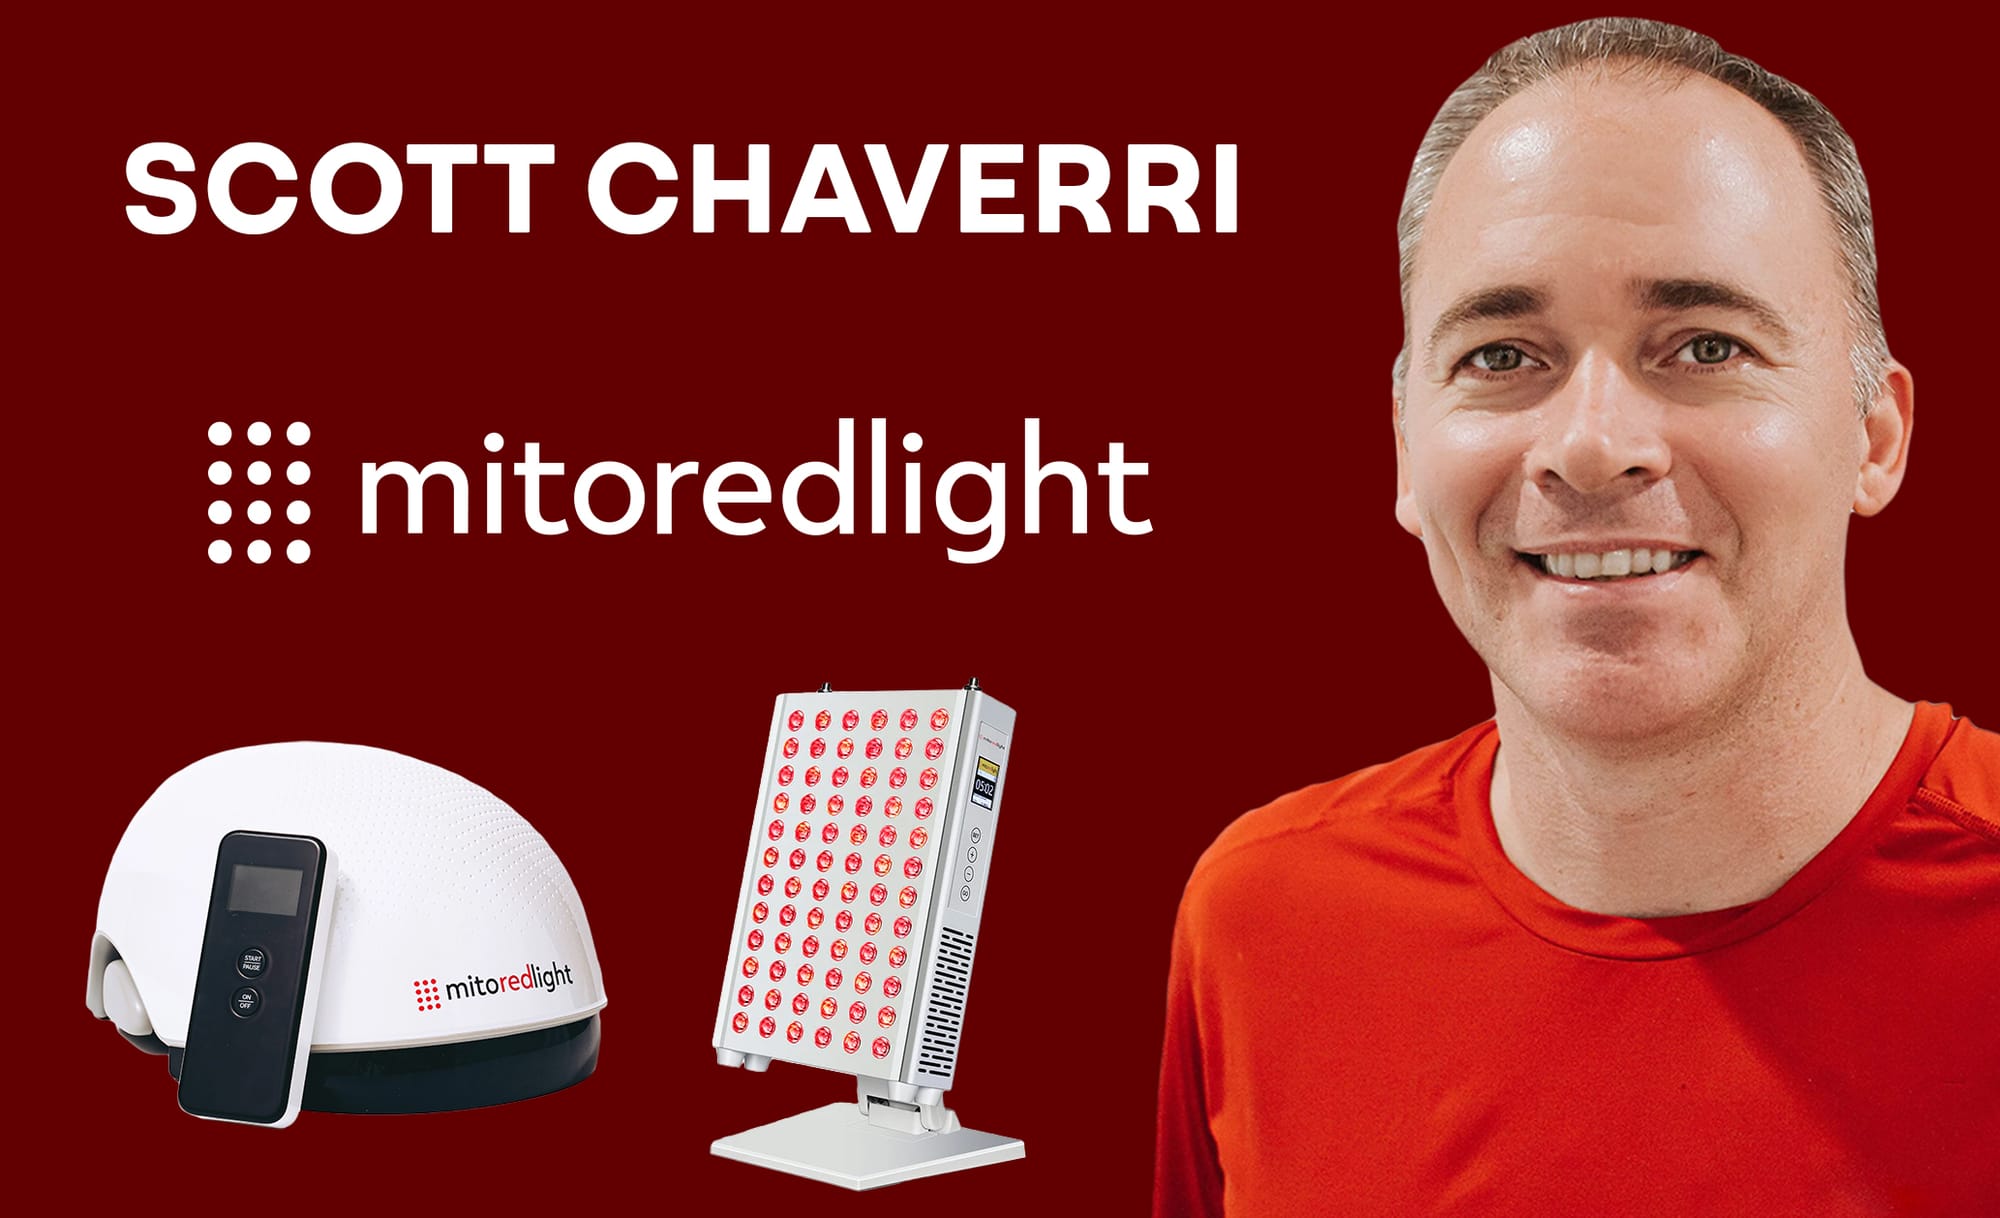 Interview with the Founder and CEO of Mito Red Light, Scott Chaverri